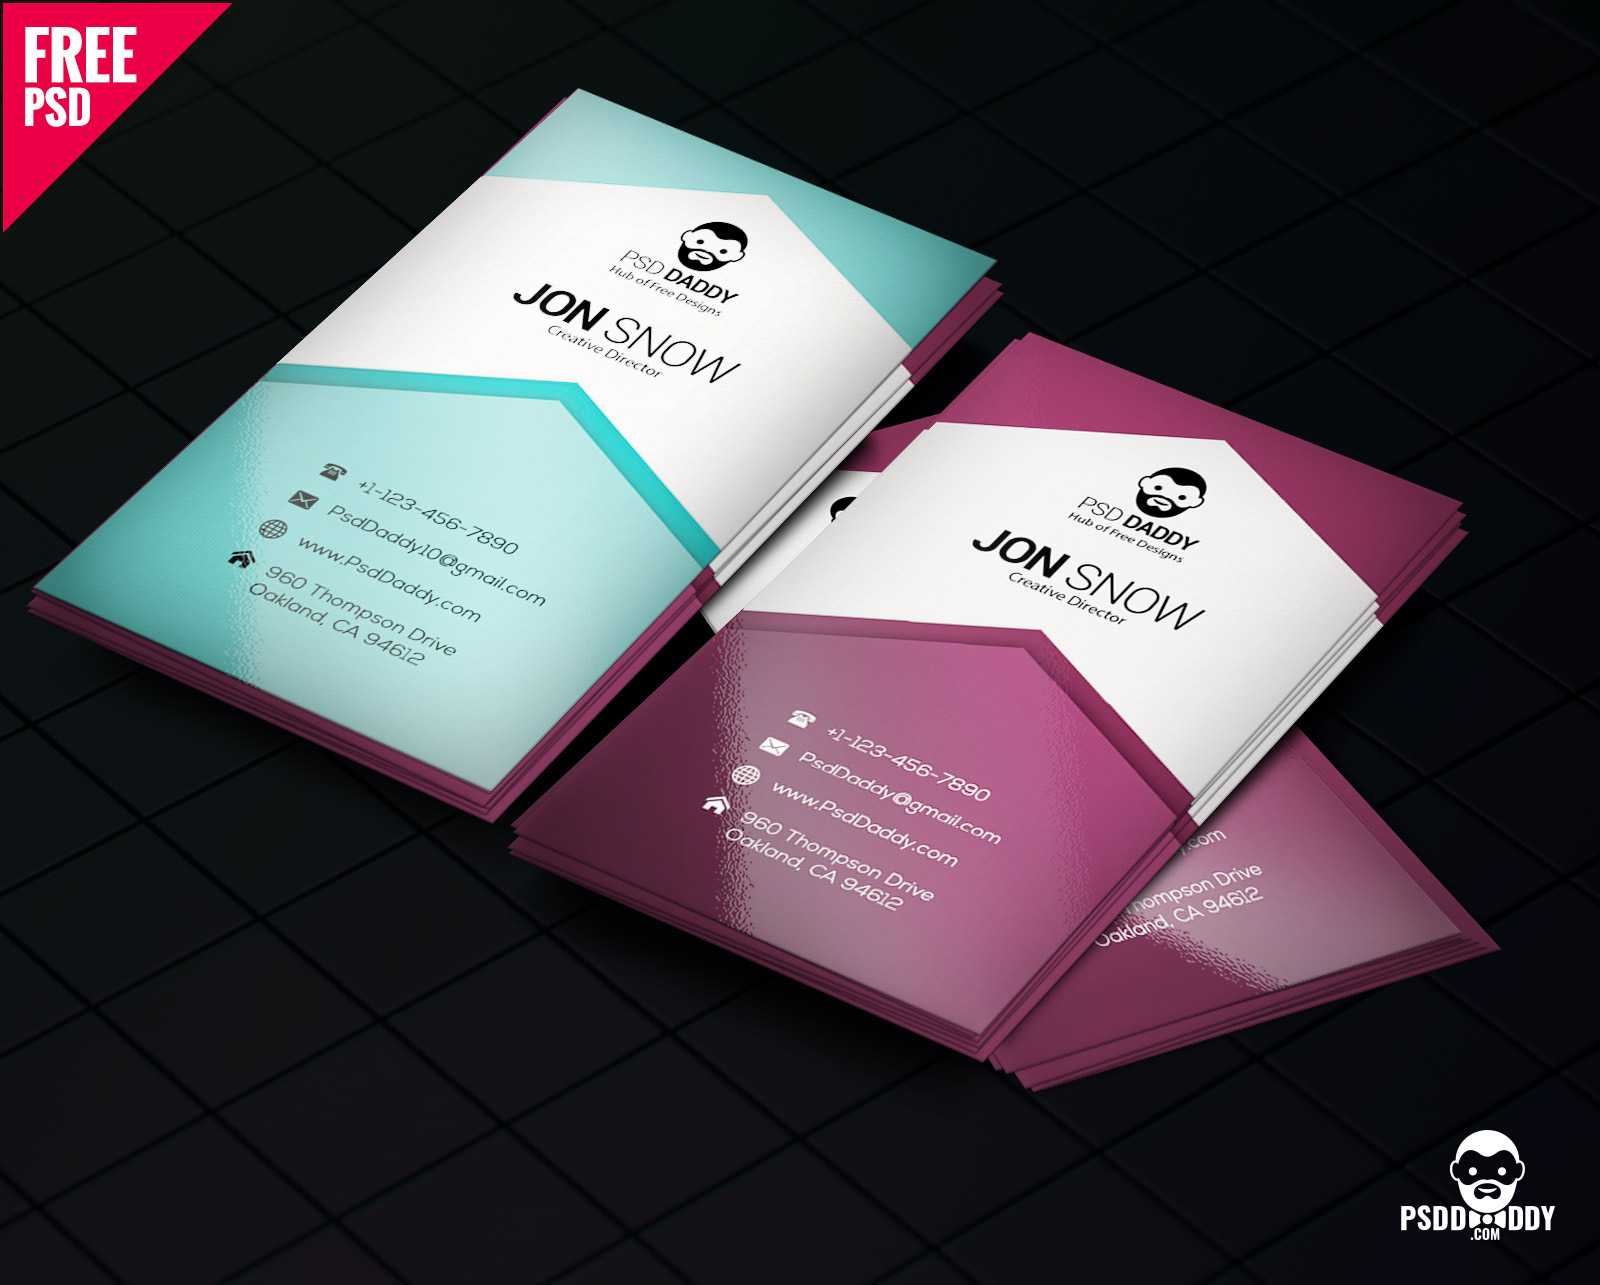 Download]Creative Business Card Psd Free | Psddaddy For Visiting Card Psd Template Free Download